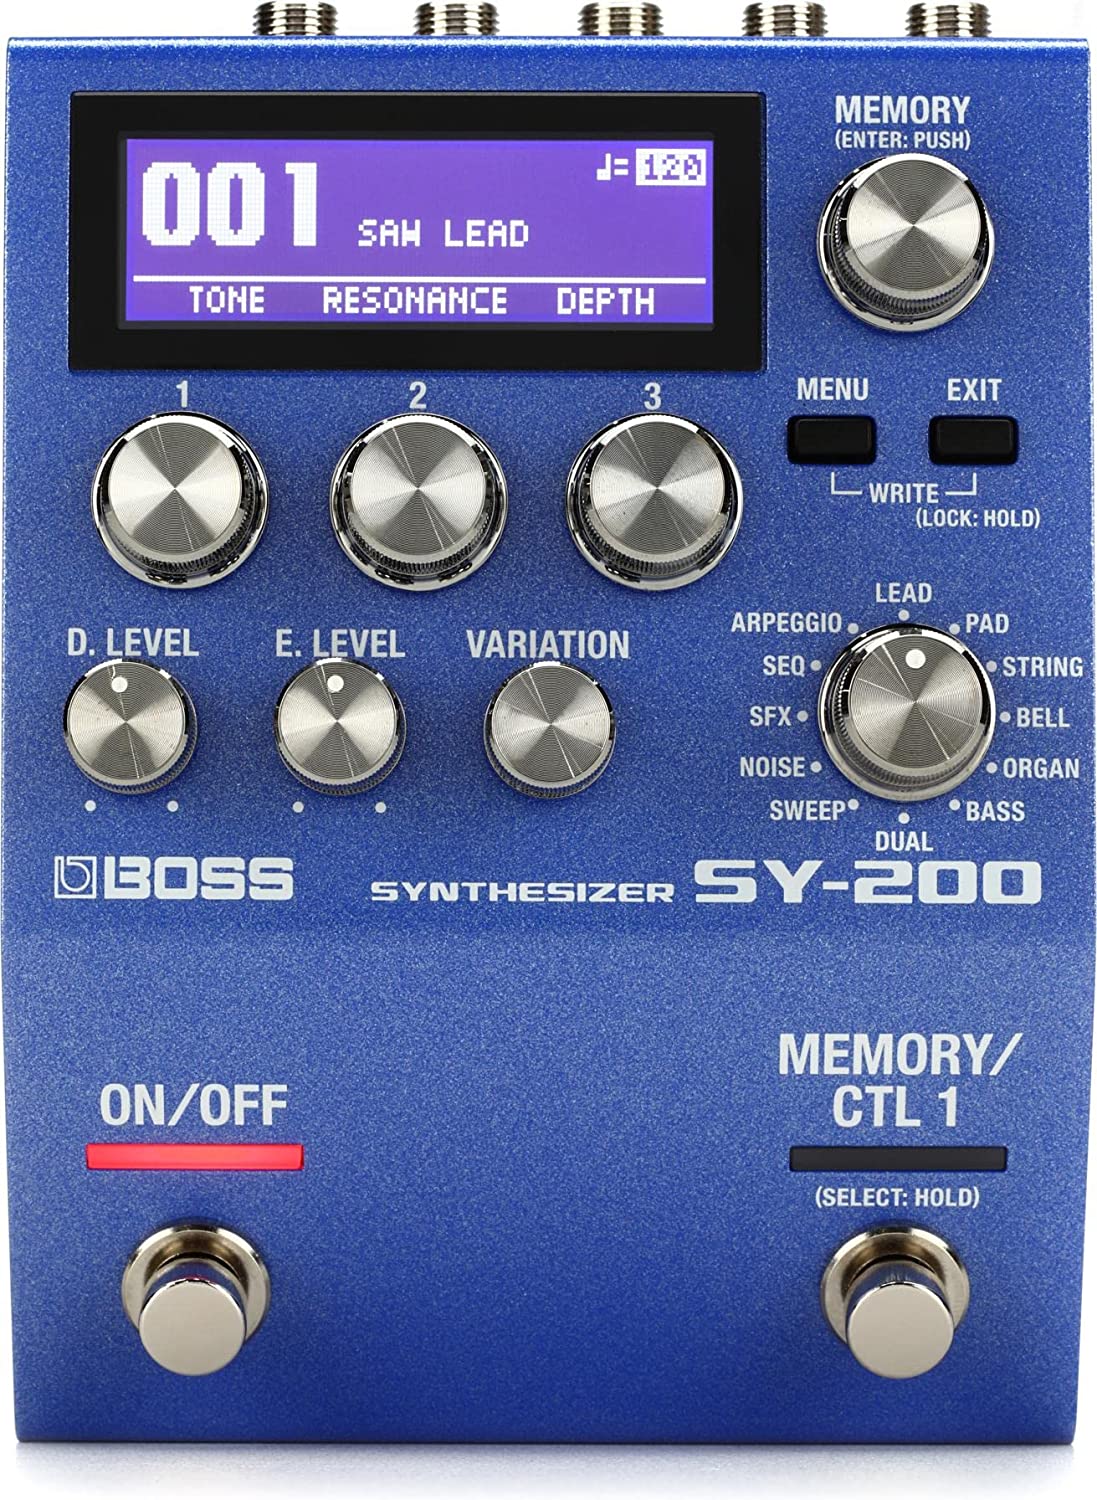 Boss SY-200 Guitar Synthesizer Pedal on a white background